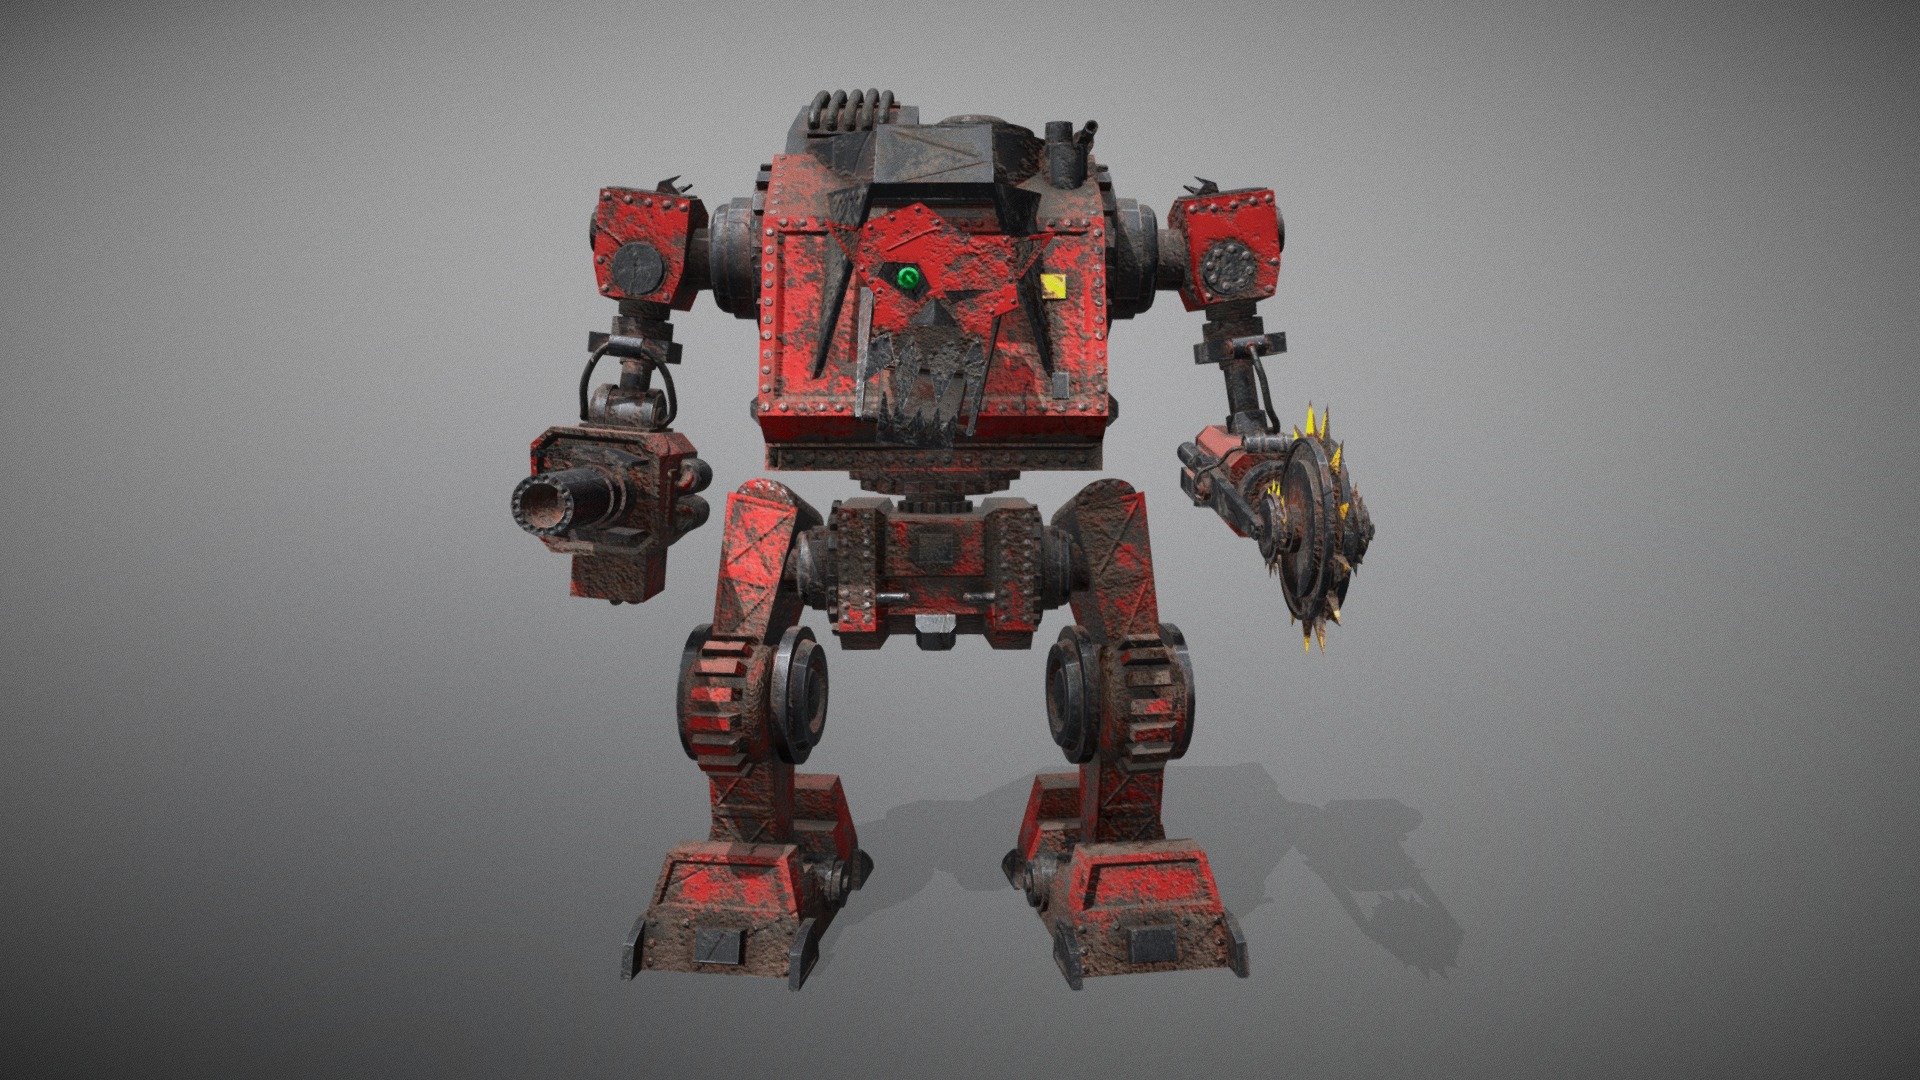 What big, red, and always runs fasta? The Red Gobbo, that’s what! Come see the hottest gretchin piloted super heavy to hit the Grim Darks! - Warhammer 40K Rebel Grotz: The Red Gobbo - 3D model by Mazuto 3d model